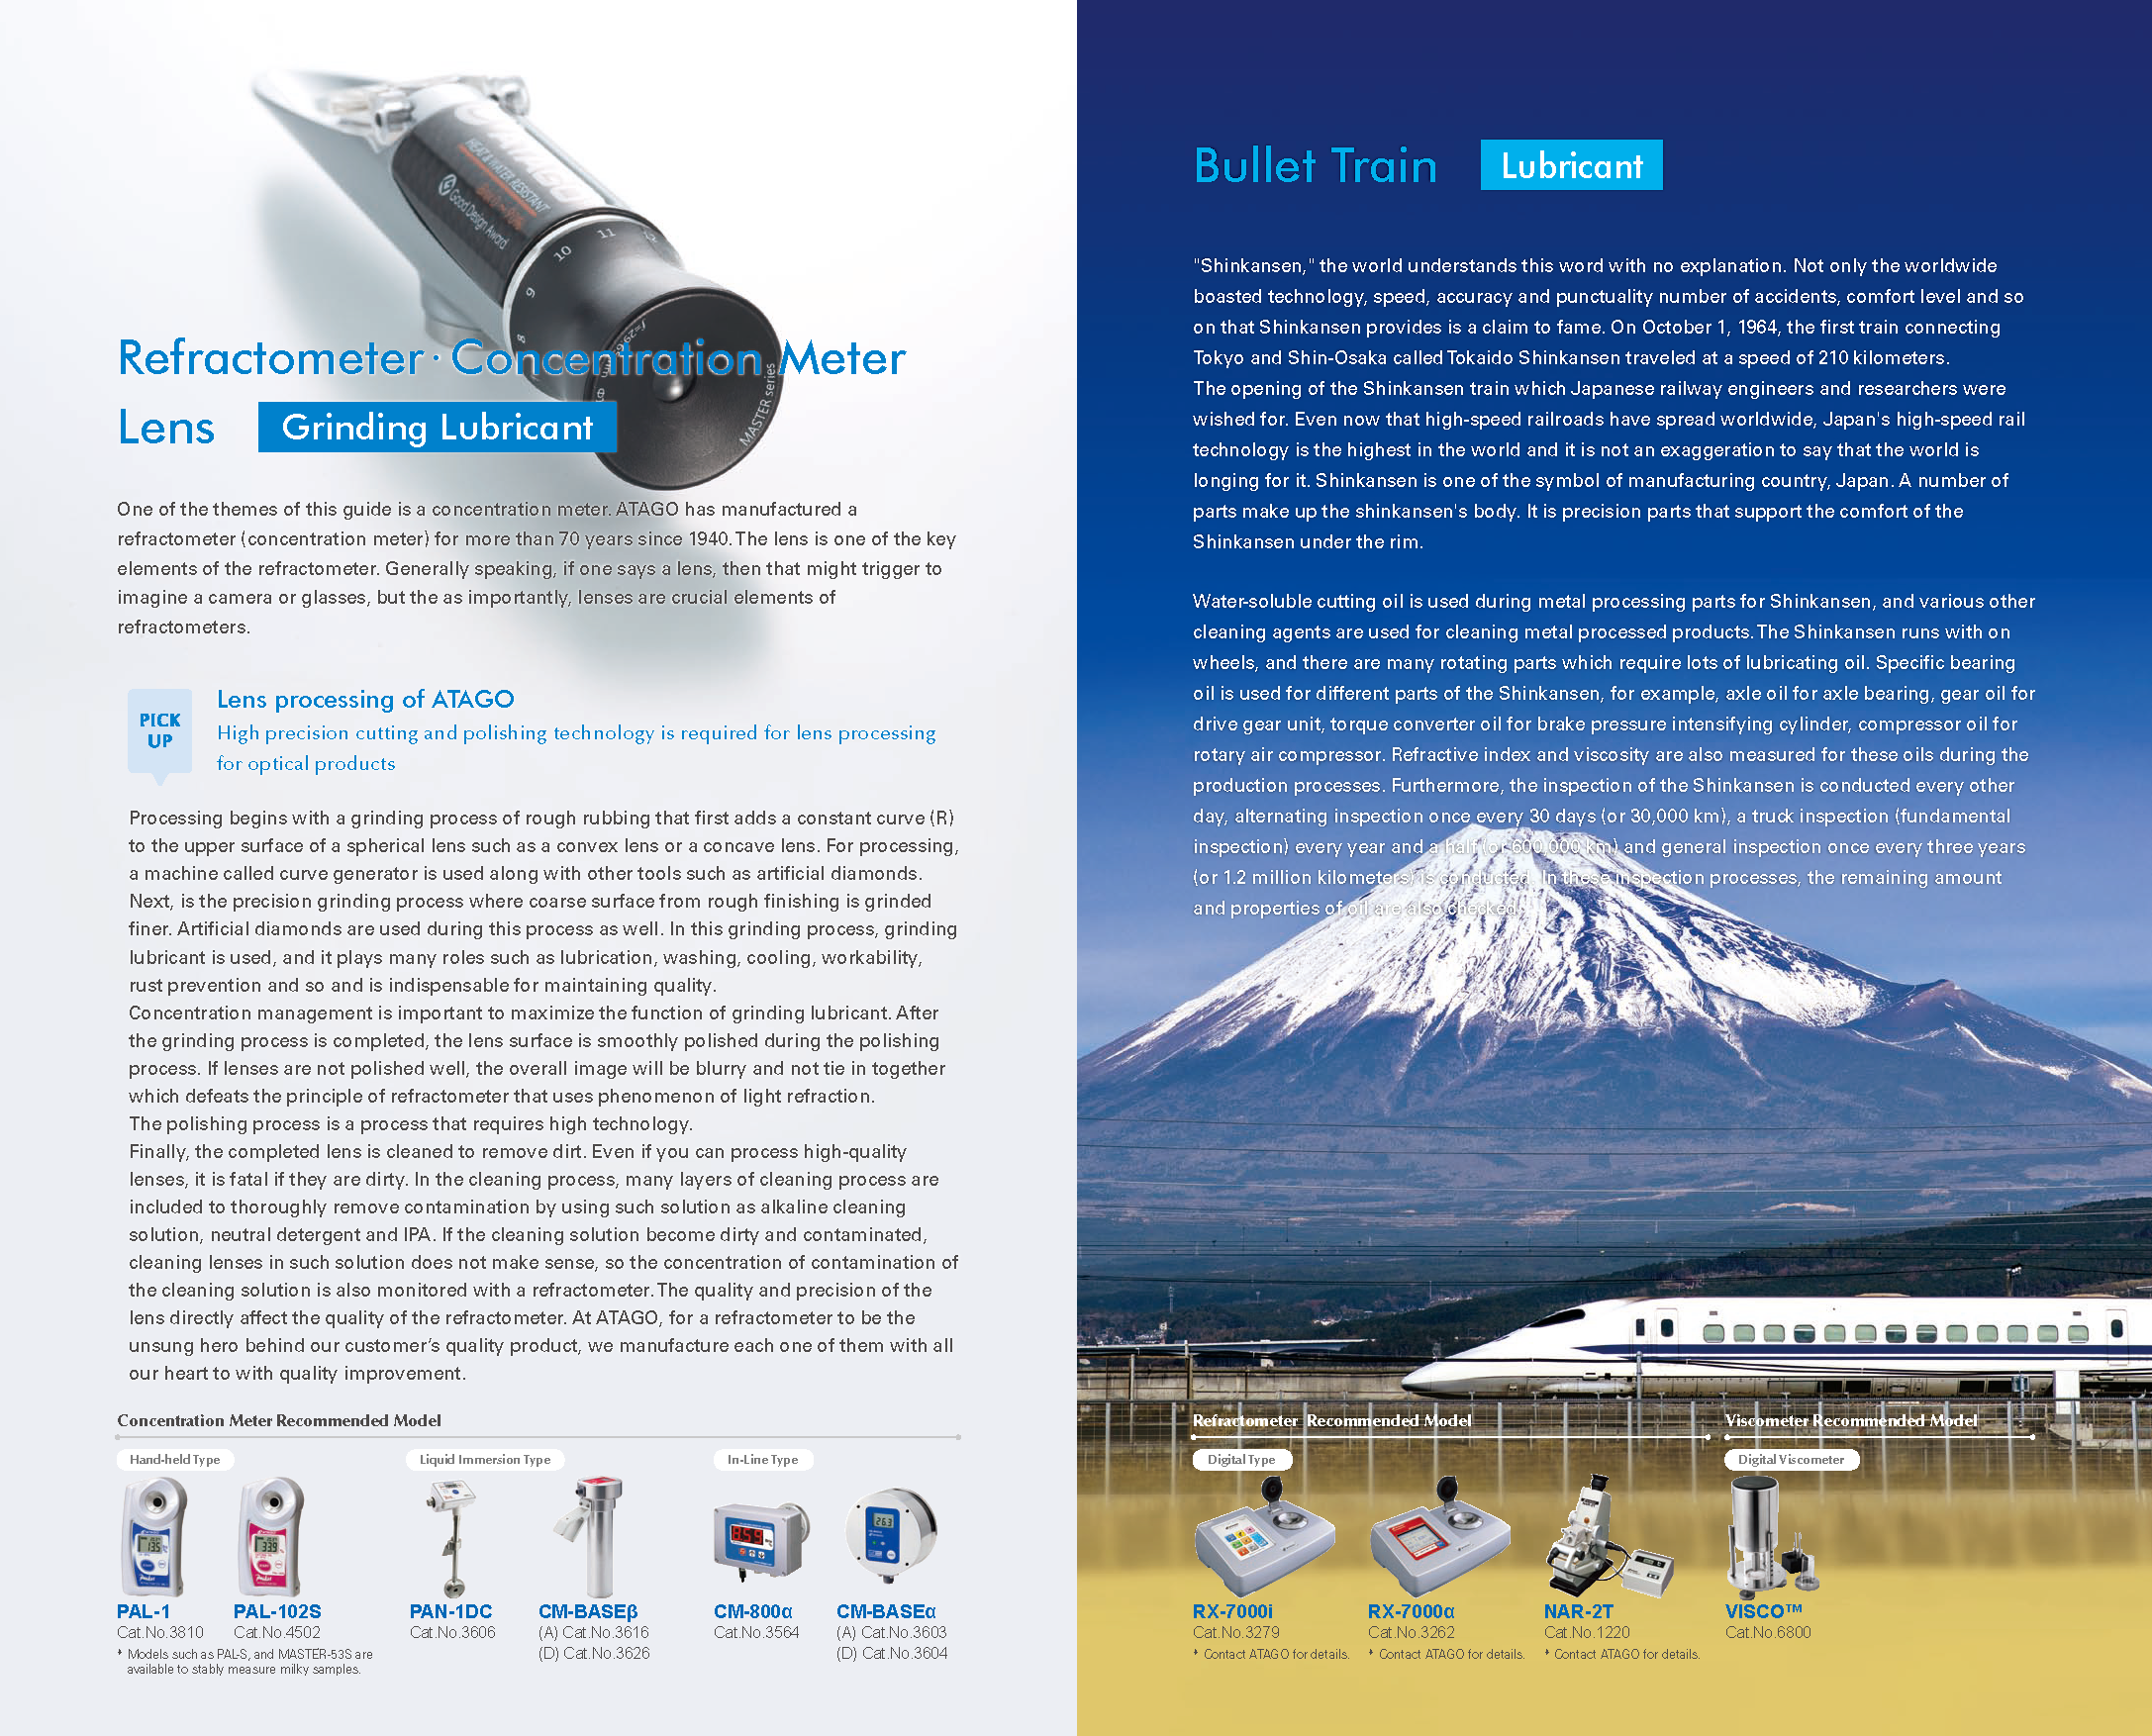 Refractometer Concentration Meter Lens[Grinding Lubricant] / Bullet Train[Lubricant]